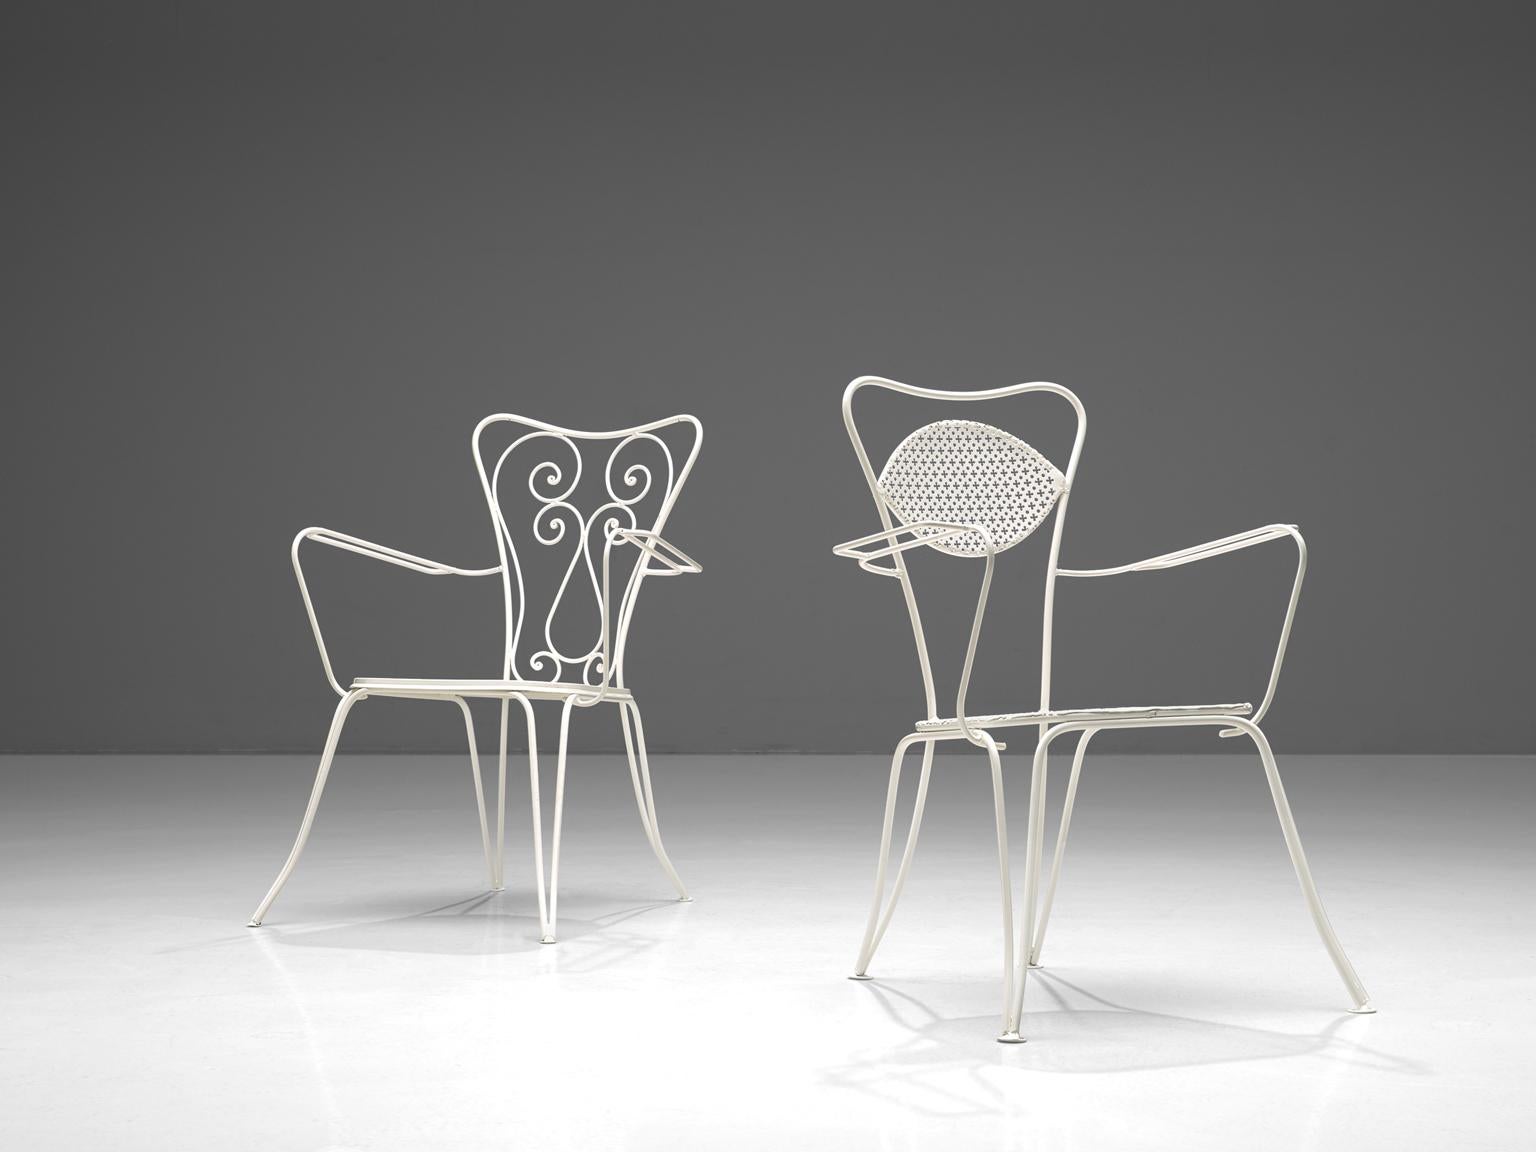 Lacquered Large Set of Italian Patio Chairs with New White Coating